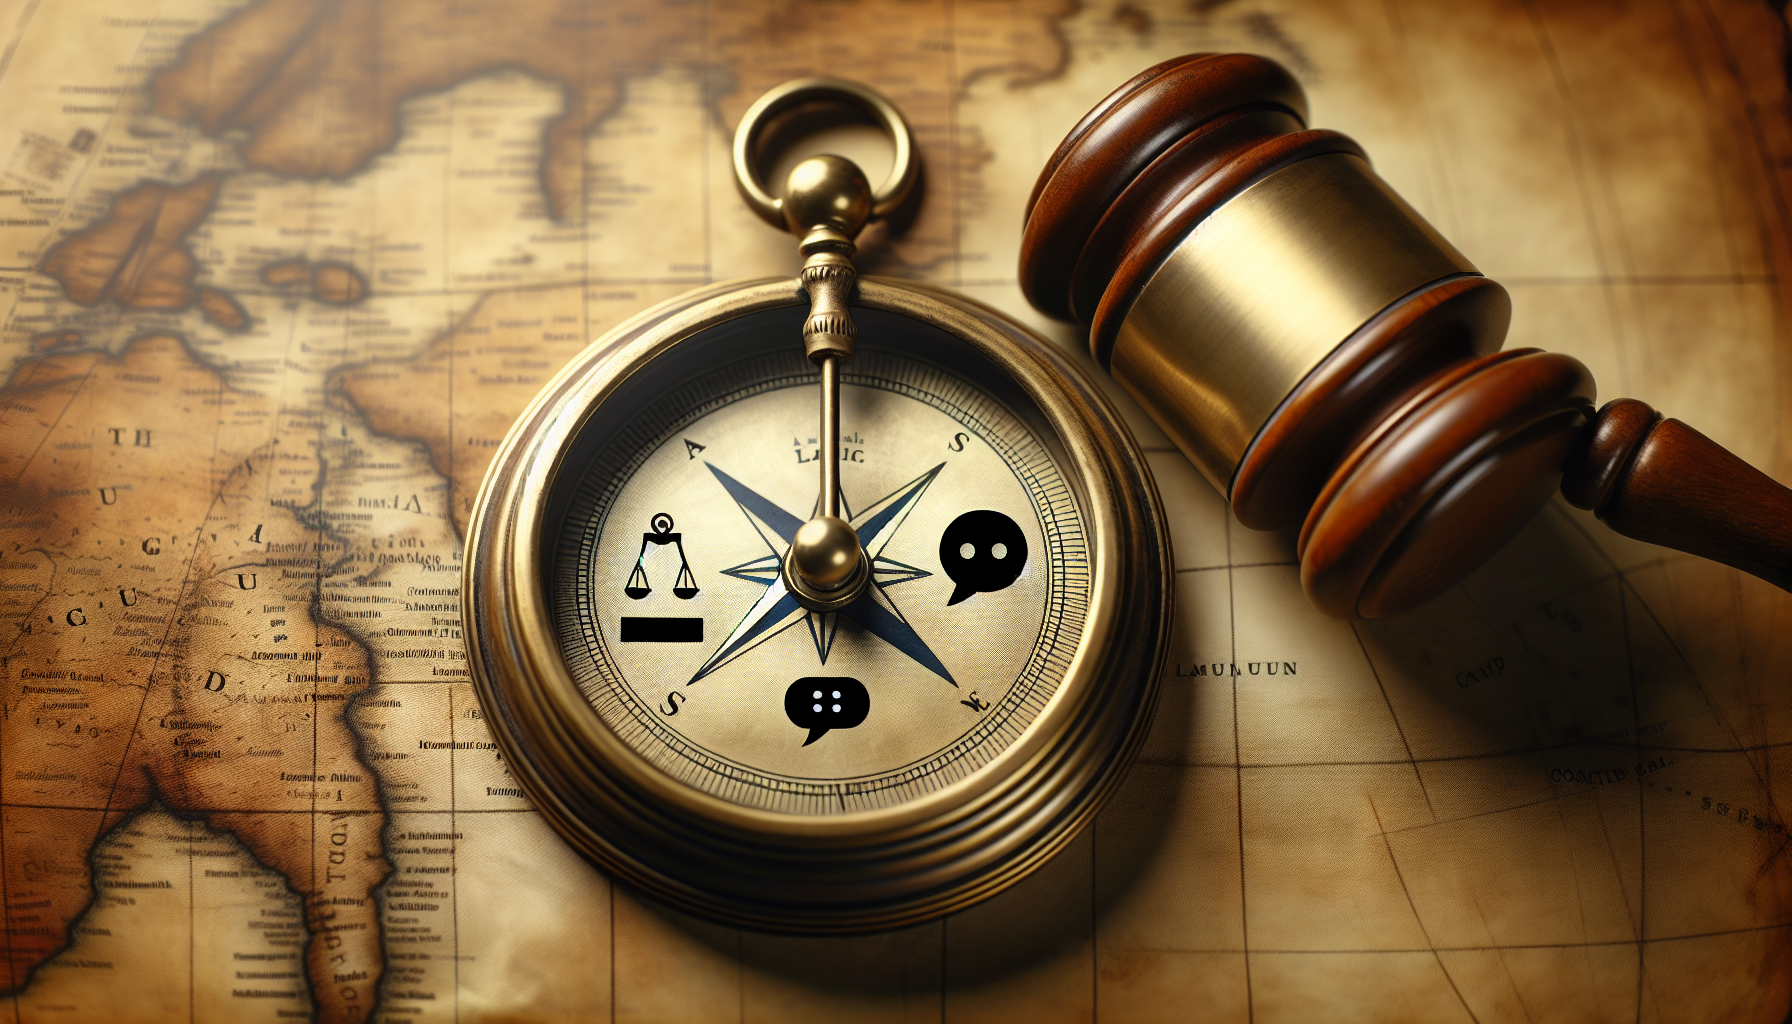 A compass pointing towards legal compliance, clear communication, and regular updates